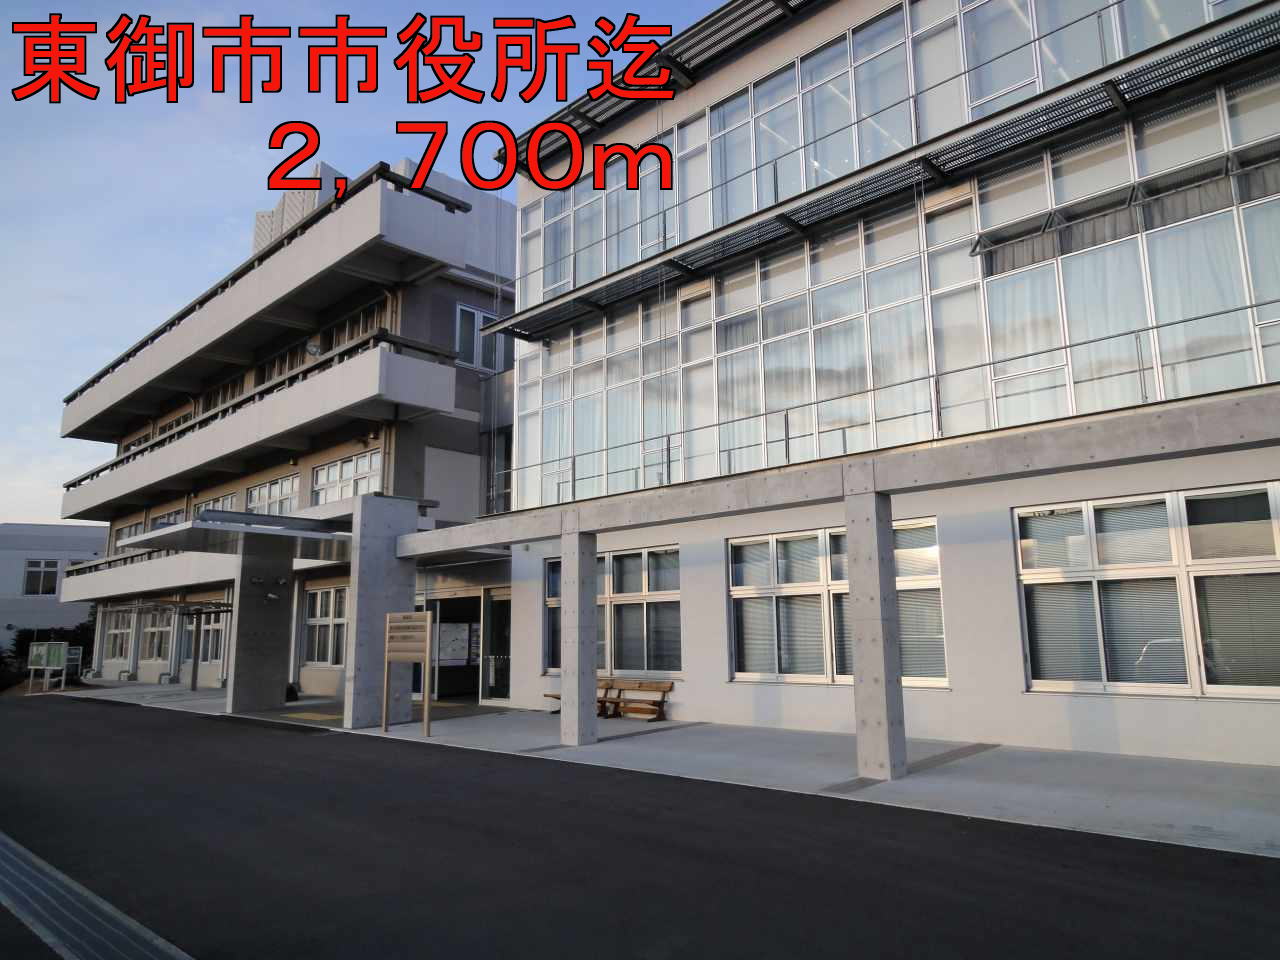 Government office. Tomi City city hall until the (government office) 2700m